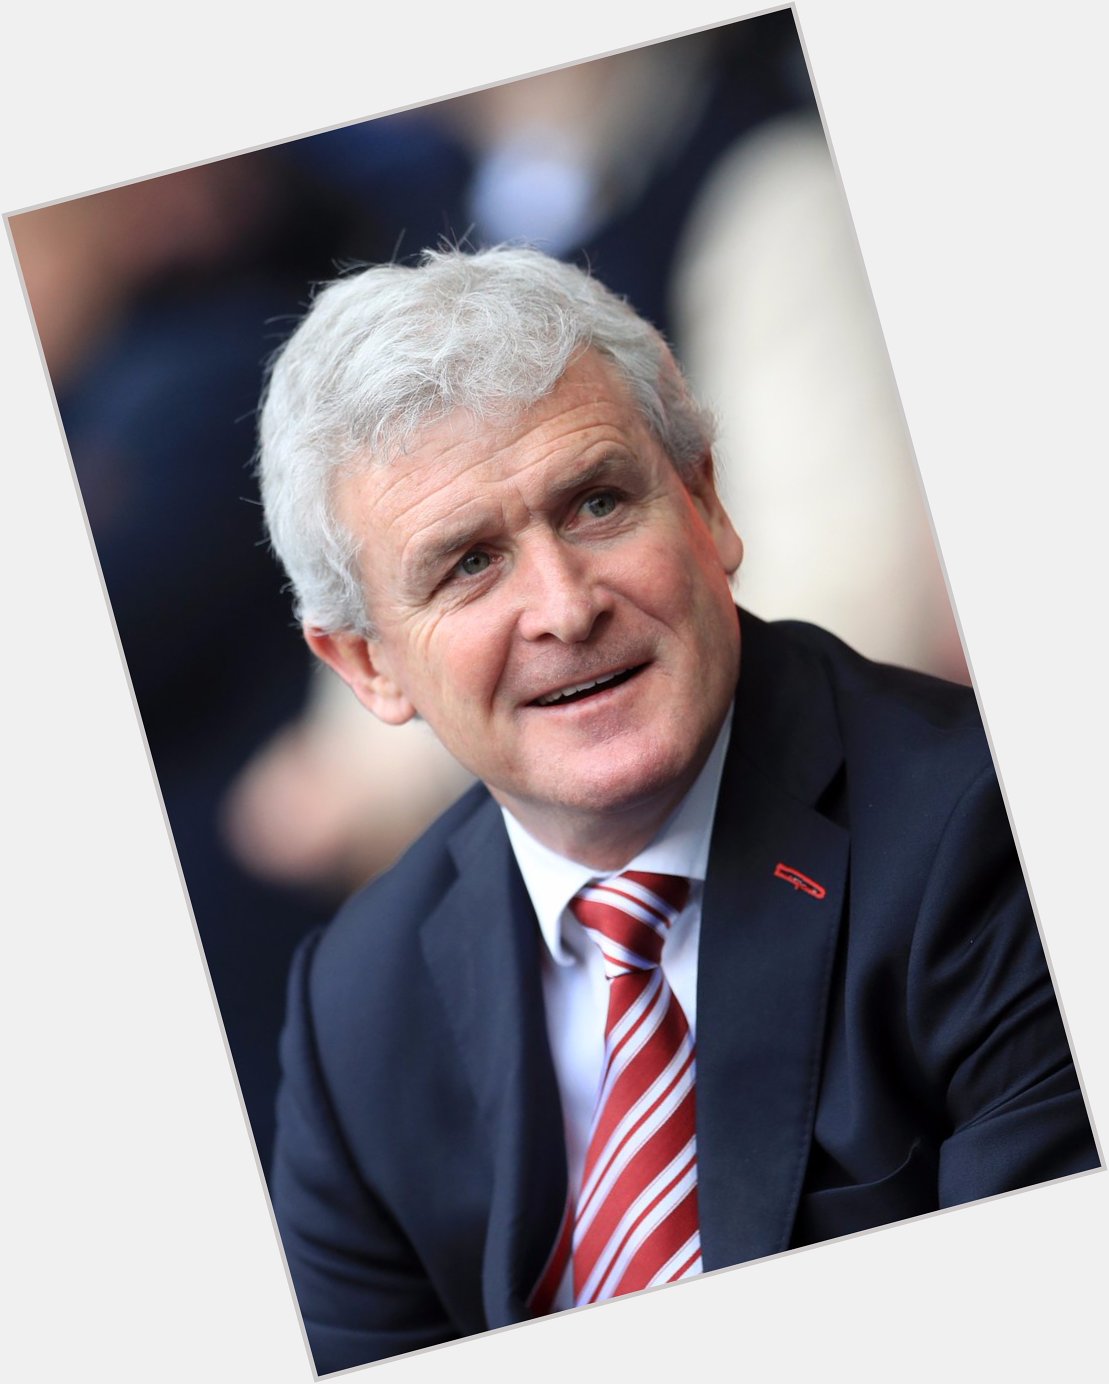  Happy 54th Birthday to manager and former Manchester United legend, Mark Hughes! 